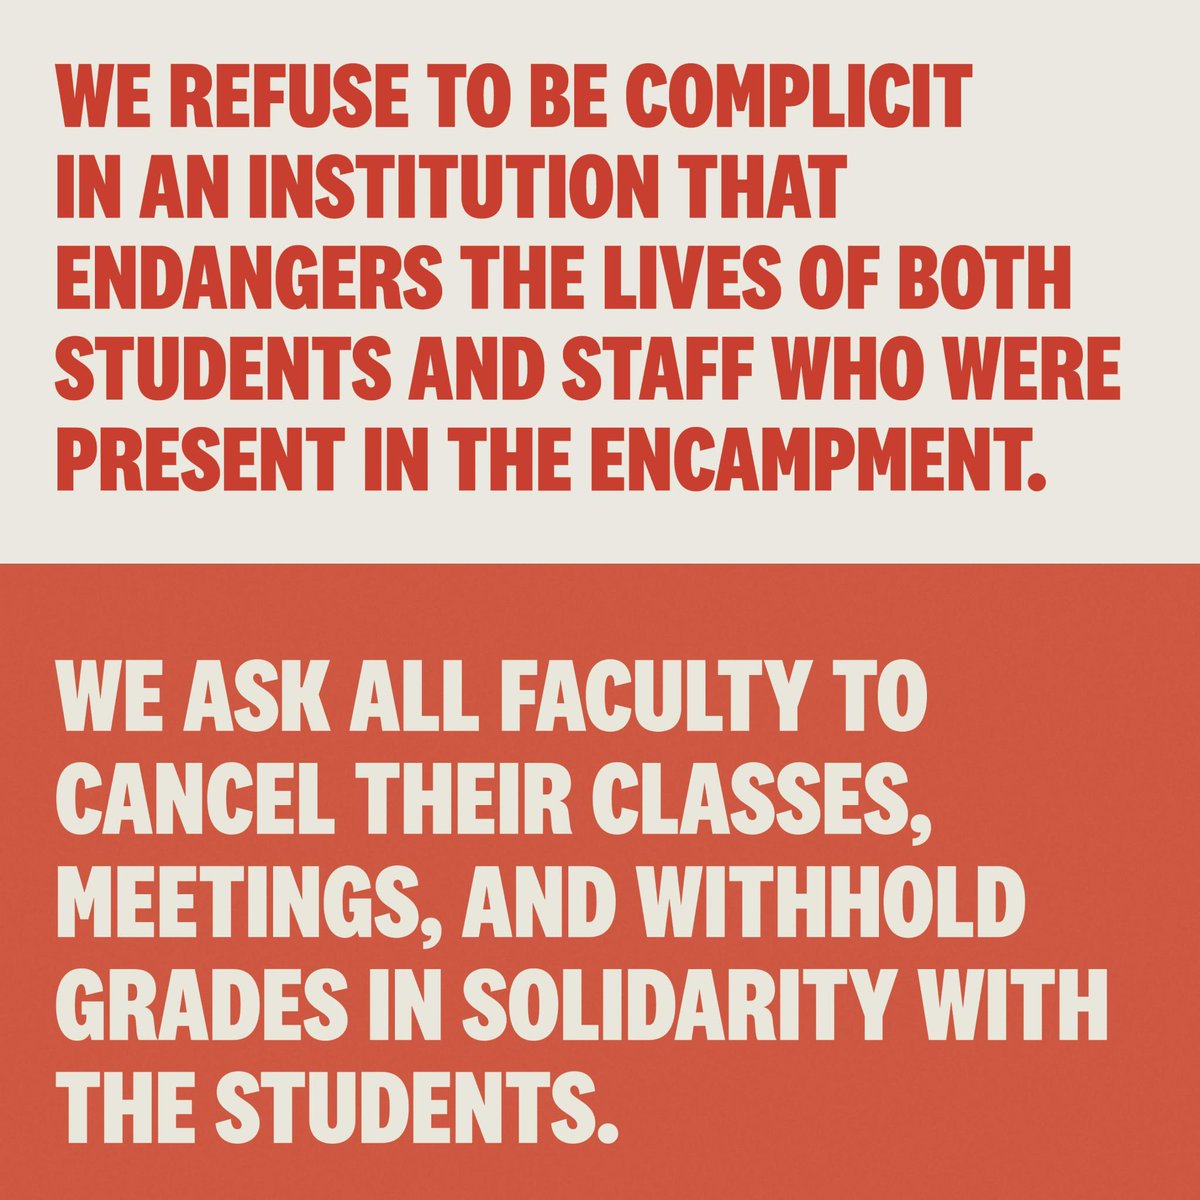 UvA staff and students have called for a strike today and a solidarity demo at 4pm on the campus lawn to express outrage at the university's violence on its own students and staff last night. Please come and show support